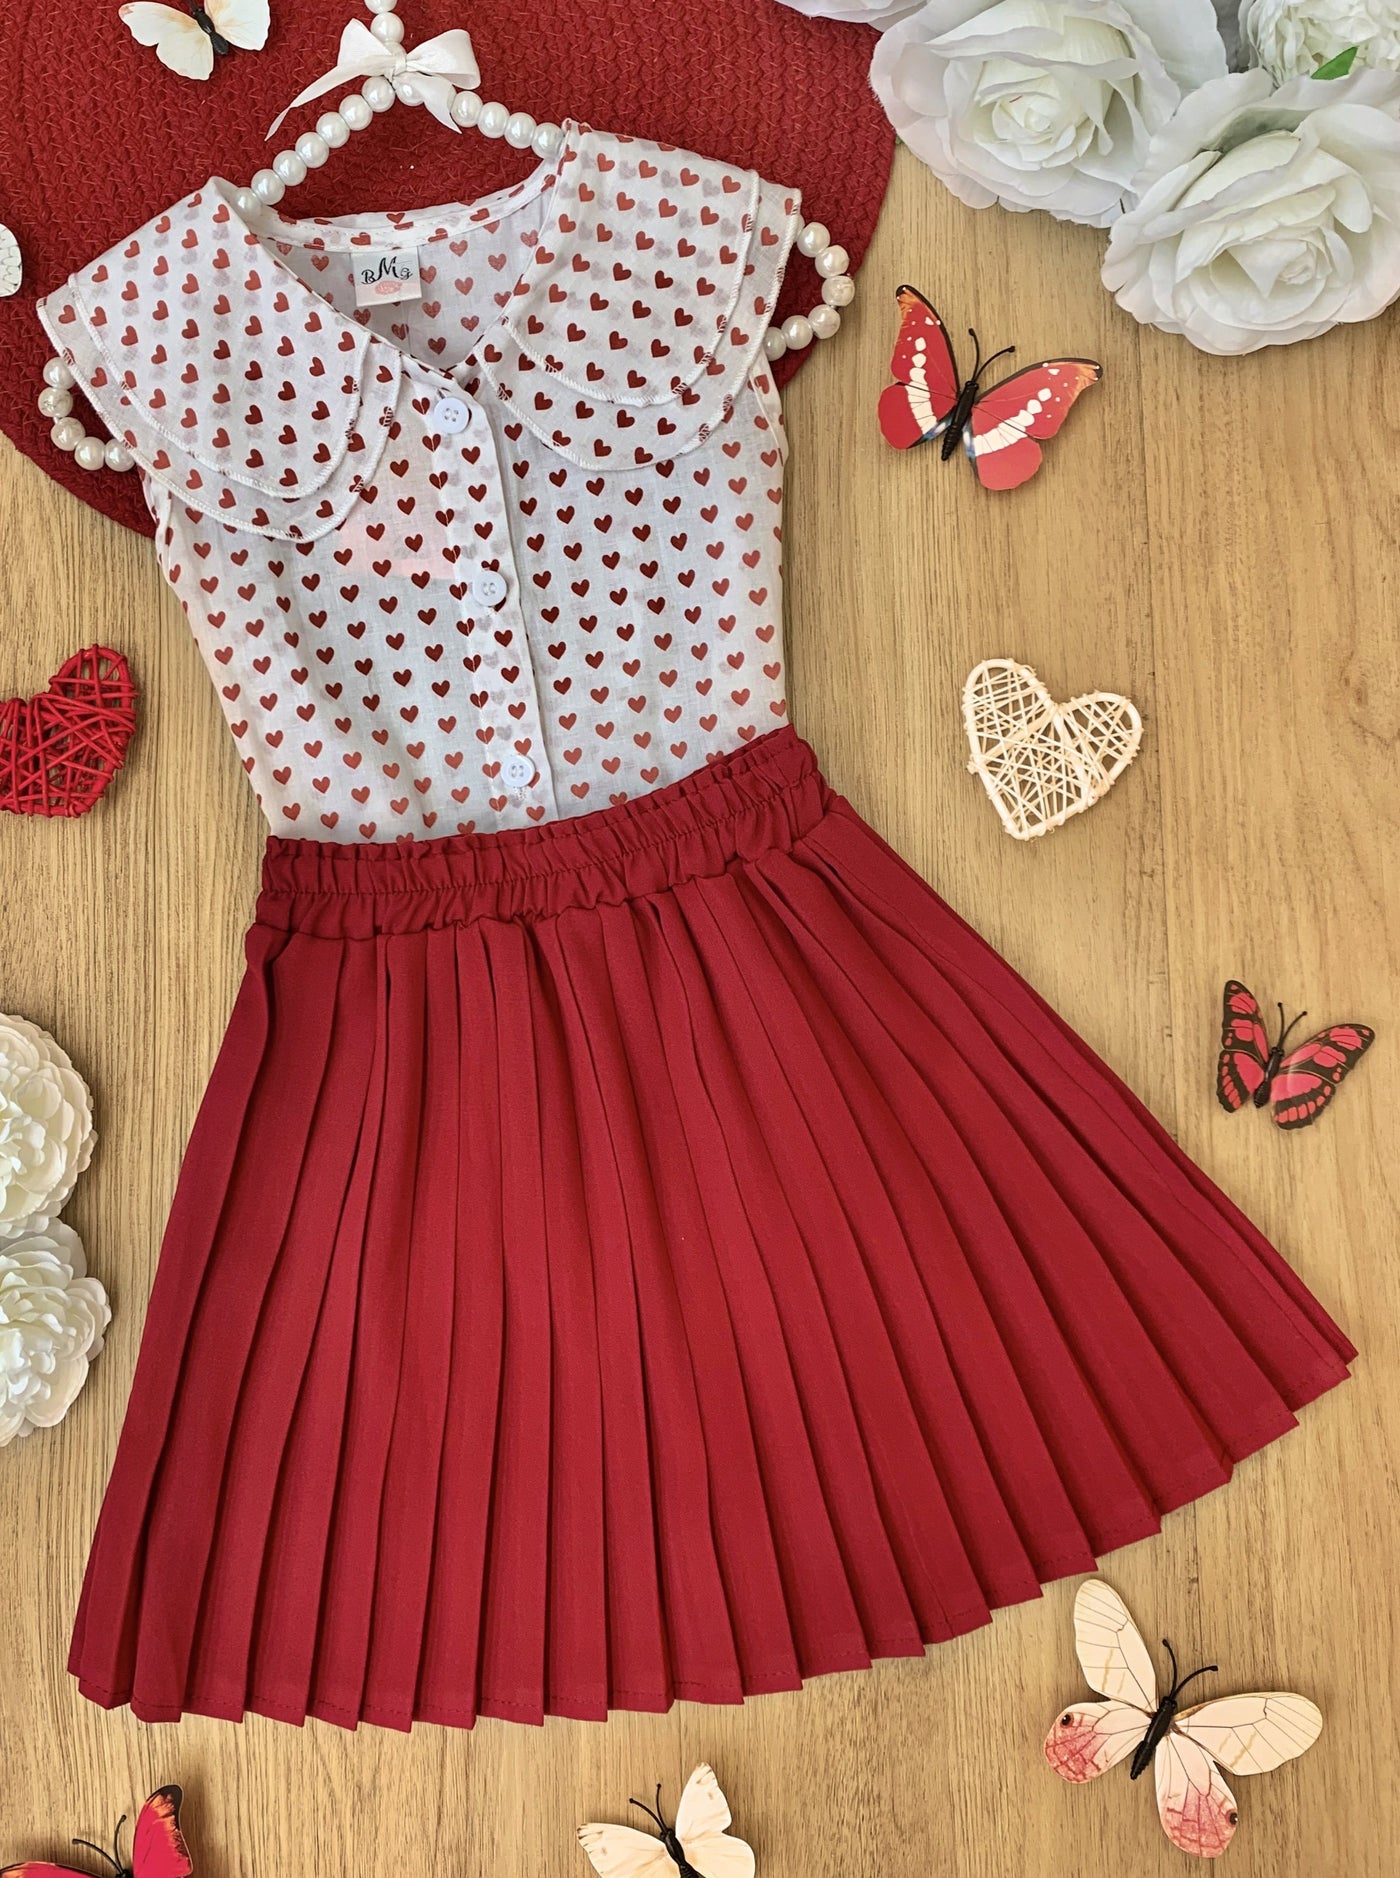 Girls  set features a top with a cute collar and heart prints and red pleated skirt